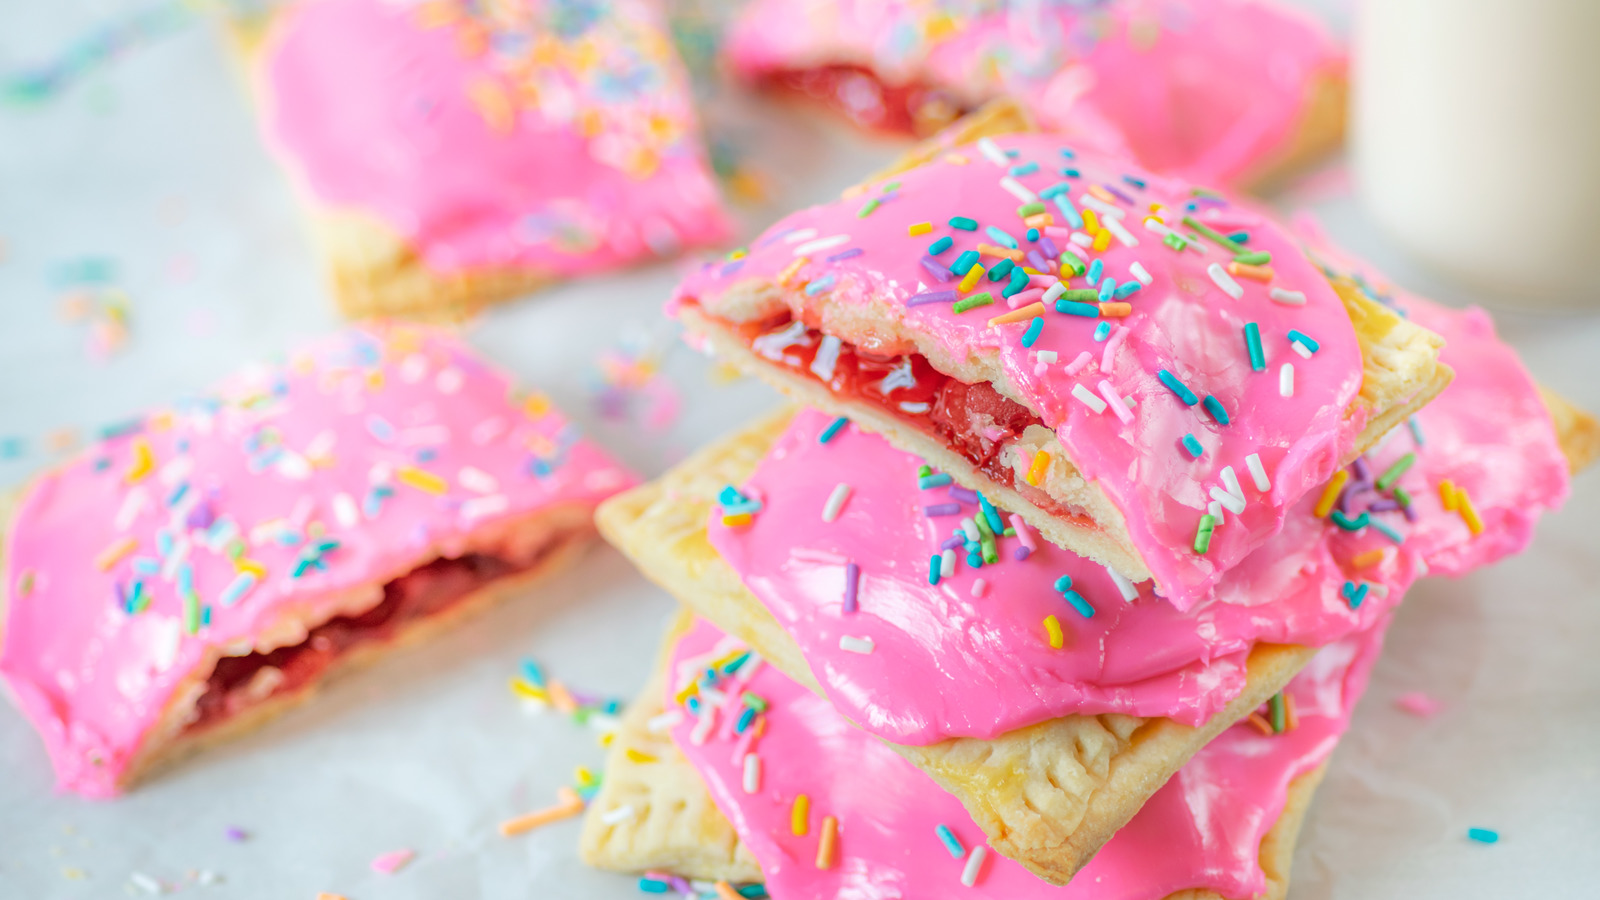 https://www.mashed.com/img/gallery/copycat-pop-tarts-you-can-make-at-home/l-intro-1608589276.jpg